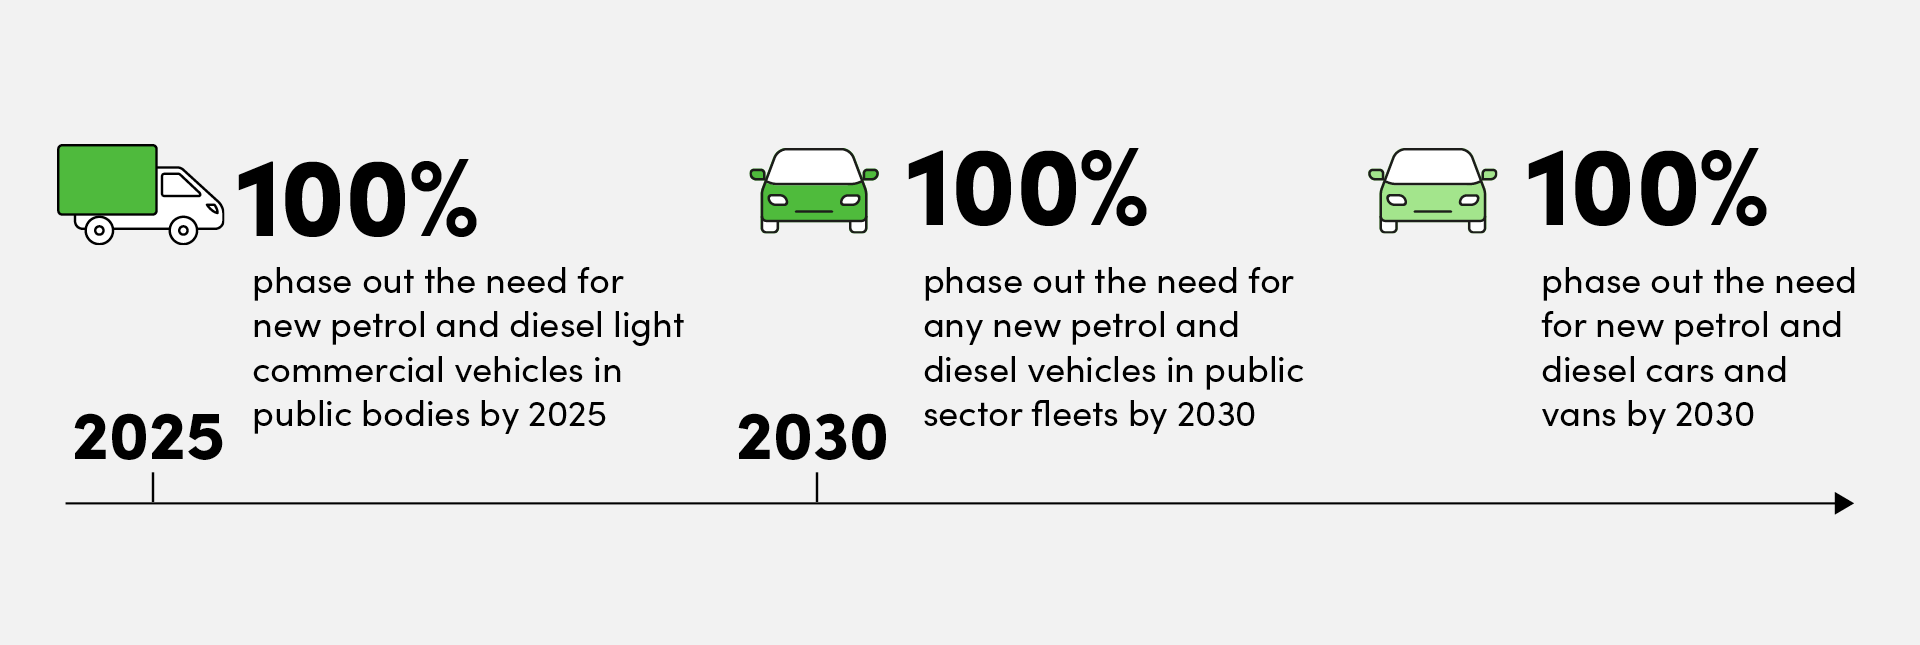 Zero Emission Vehicles targets - a timeline showing targets of phasing out need for new petrol or diesel light commercial vehicles in public bodies by 2025; phasing out need for any new petrol or diesel vehicles in public sector fleets by 2030; phasing out need for new petrol or diesel cars or vans by 2030.